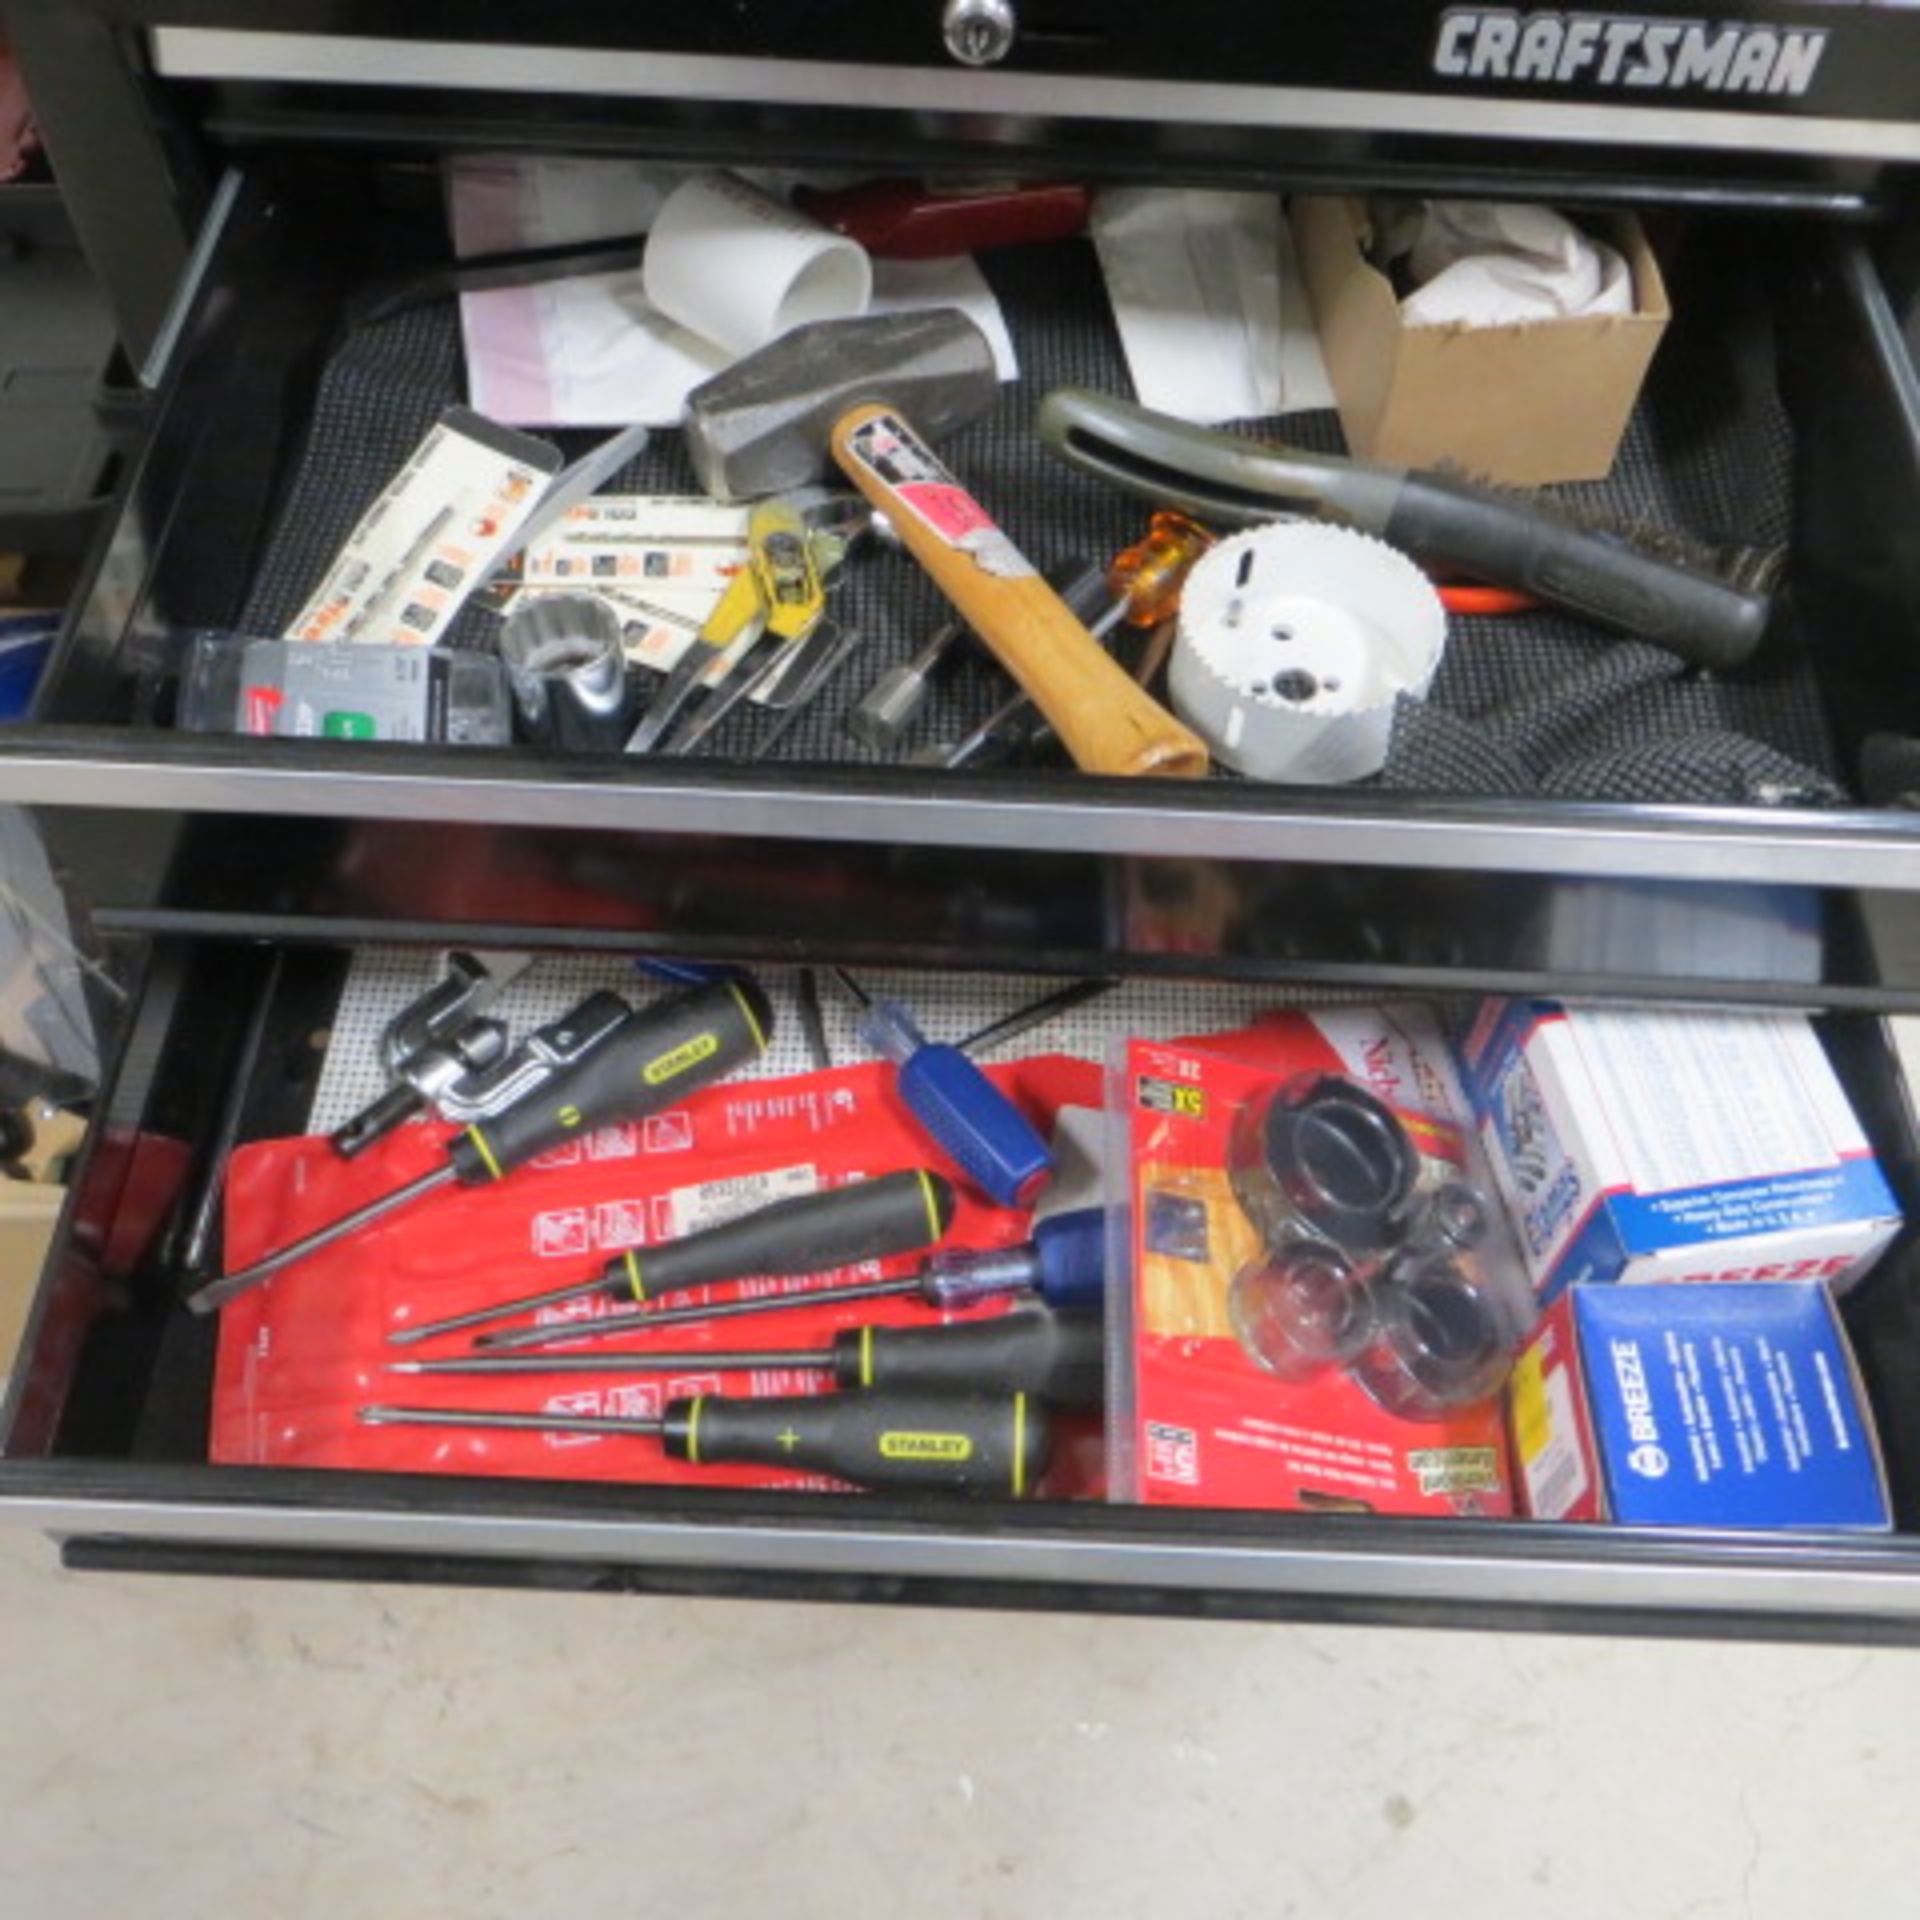 CRAFTSMAN TOOL BOX AND CONTENTS - Image 6 of 7